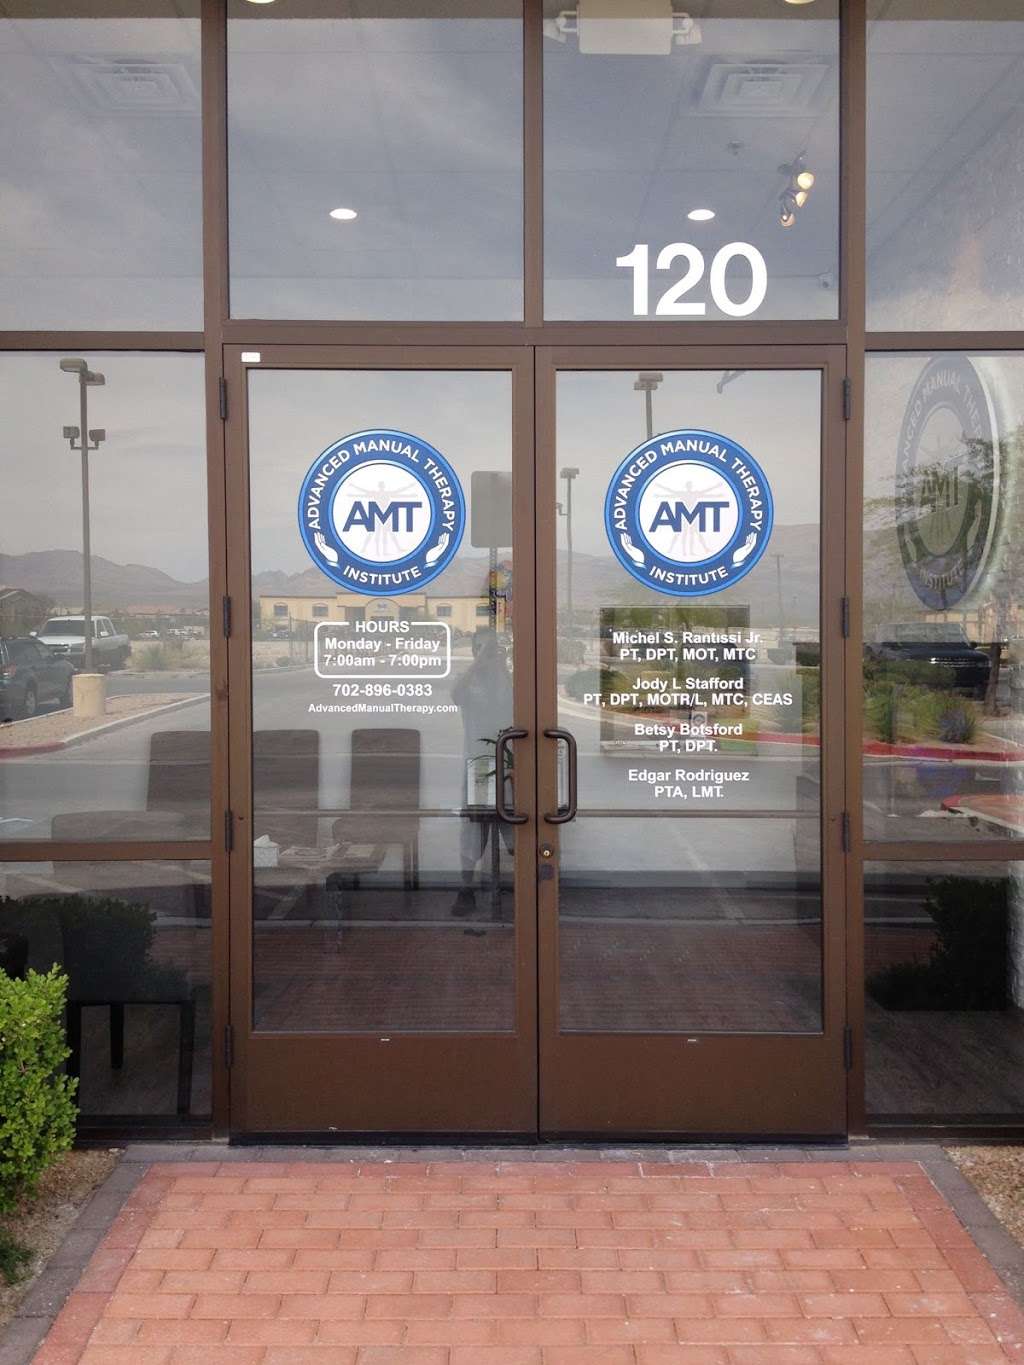 Advanced Manual Therapy Institute | 6424 Losee Rd #120, North Las Vegas, NV 89086, USA | Phone: (702) 896-0383